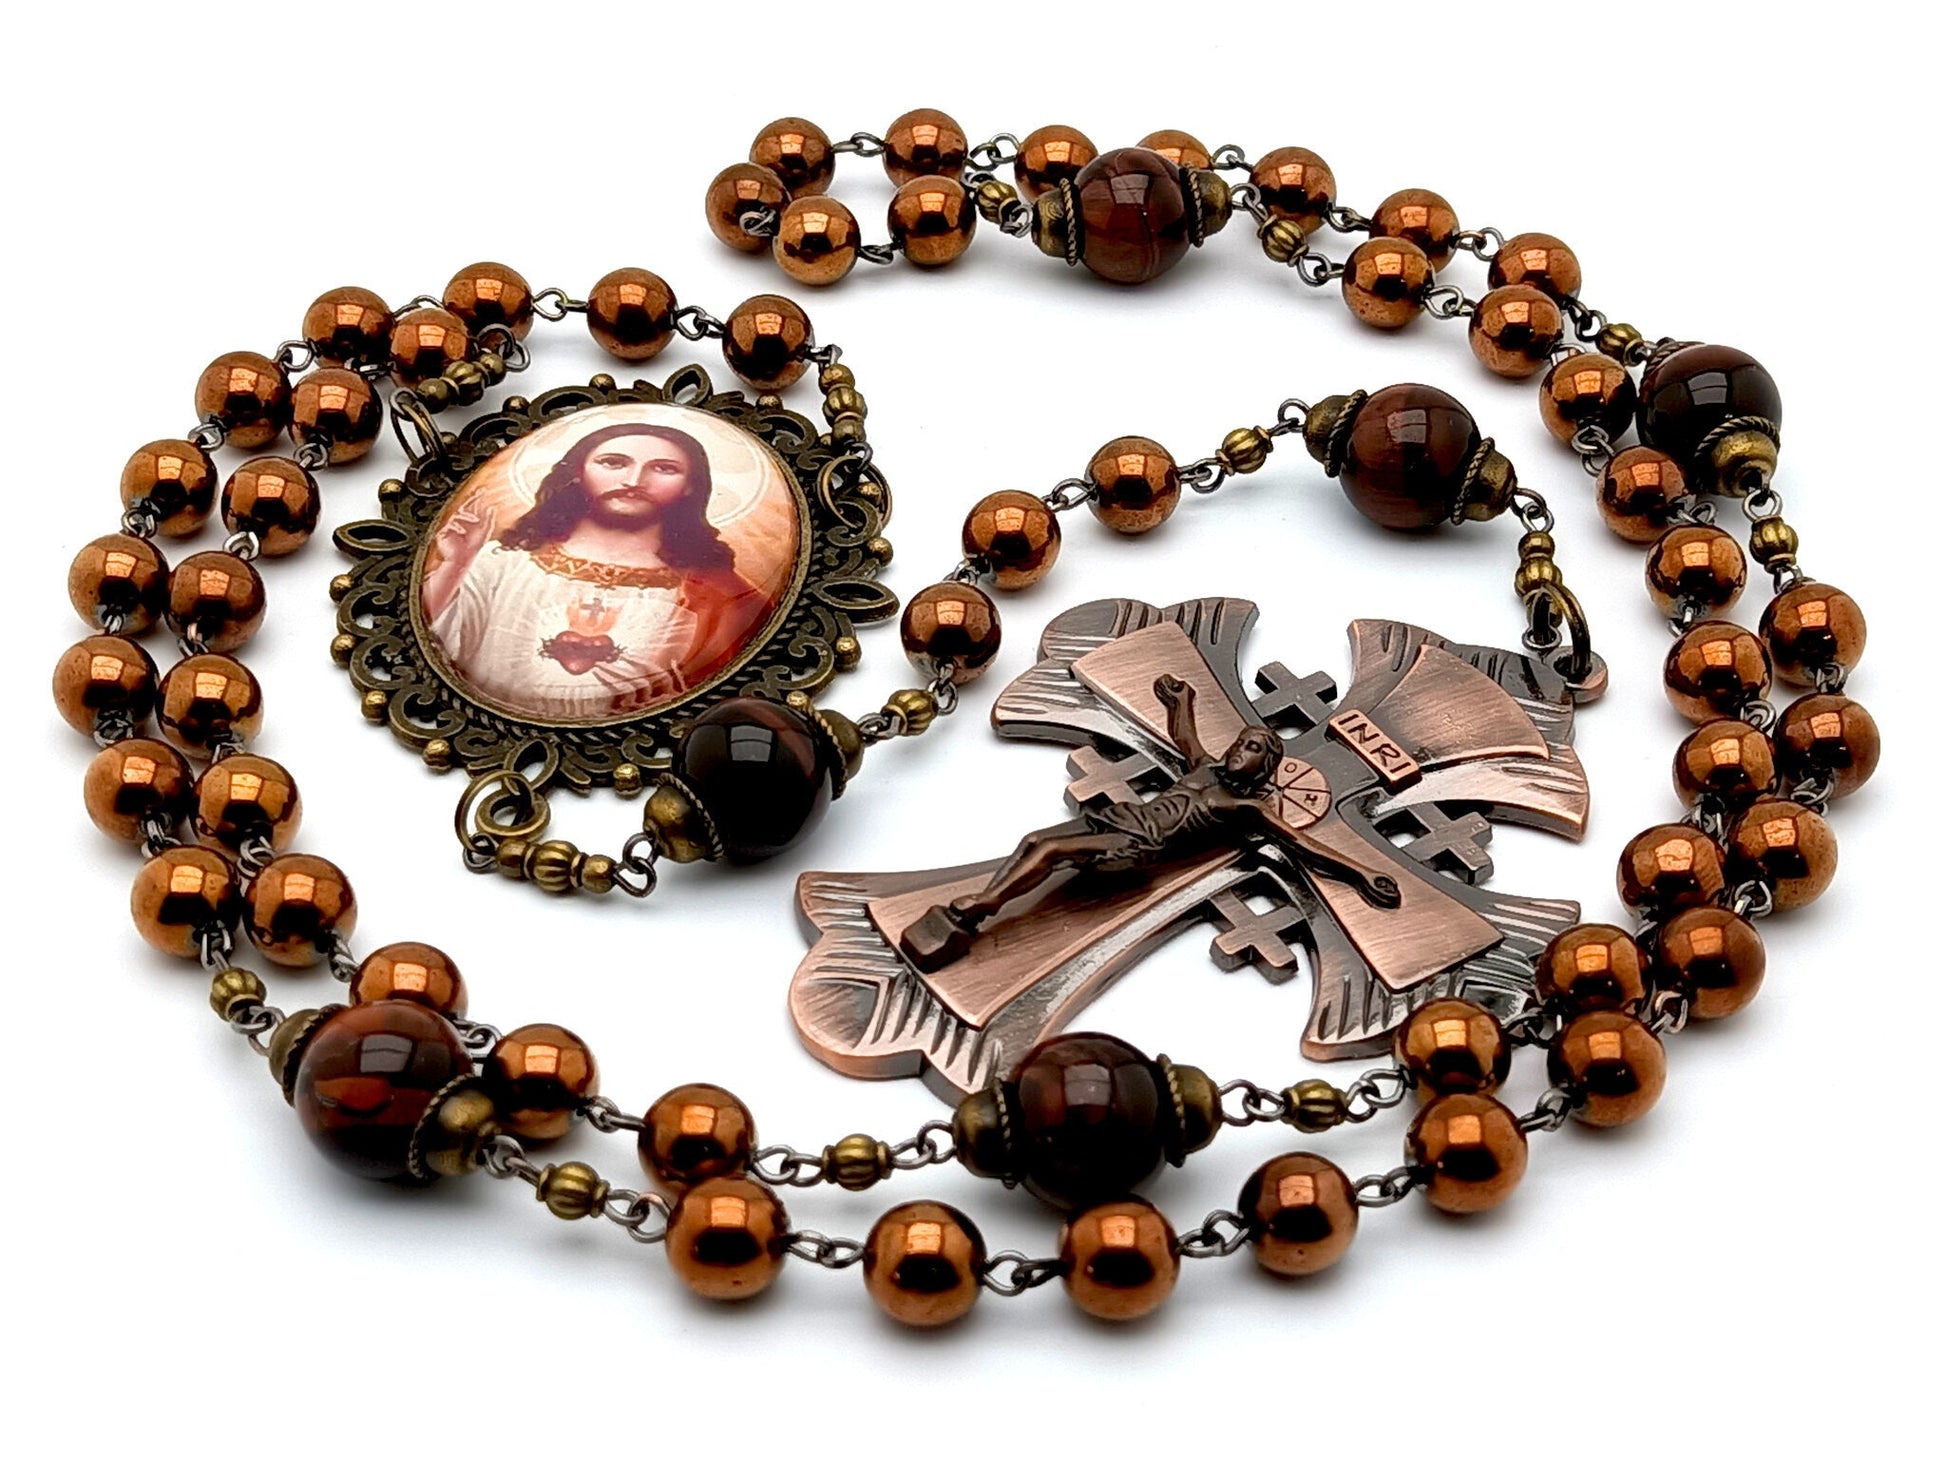 Sacred Heart unique rosary beads with bronze hematite and tigers eye gemstone beads, bronze crucifix and picture centre medal.